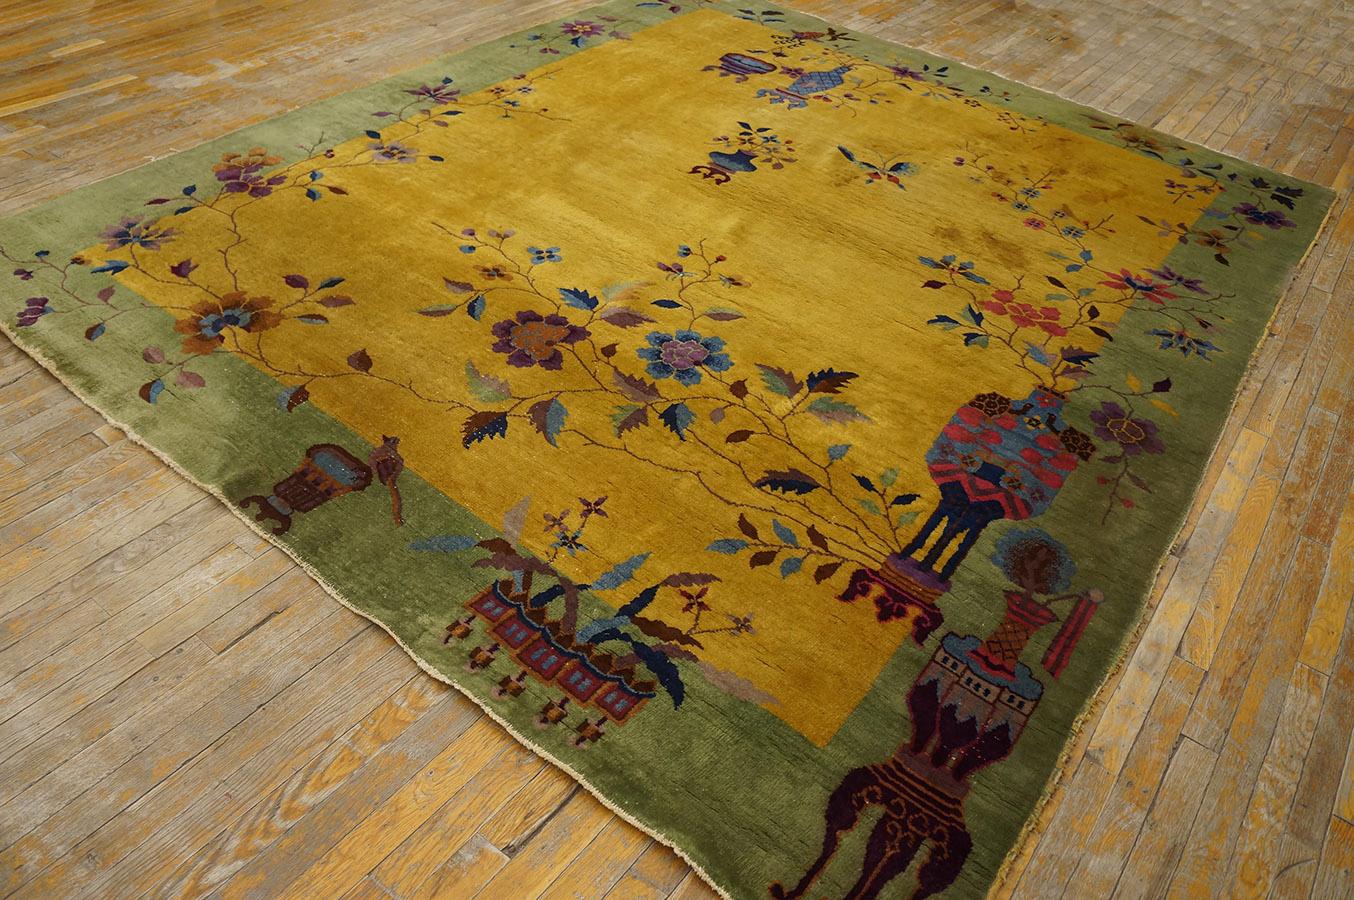 Hand-Knotted 1920s Chinese Art Deco Carpet ( 8' x 9' 6